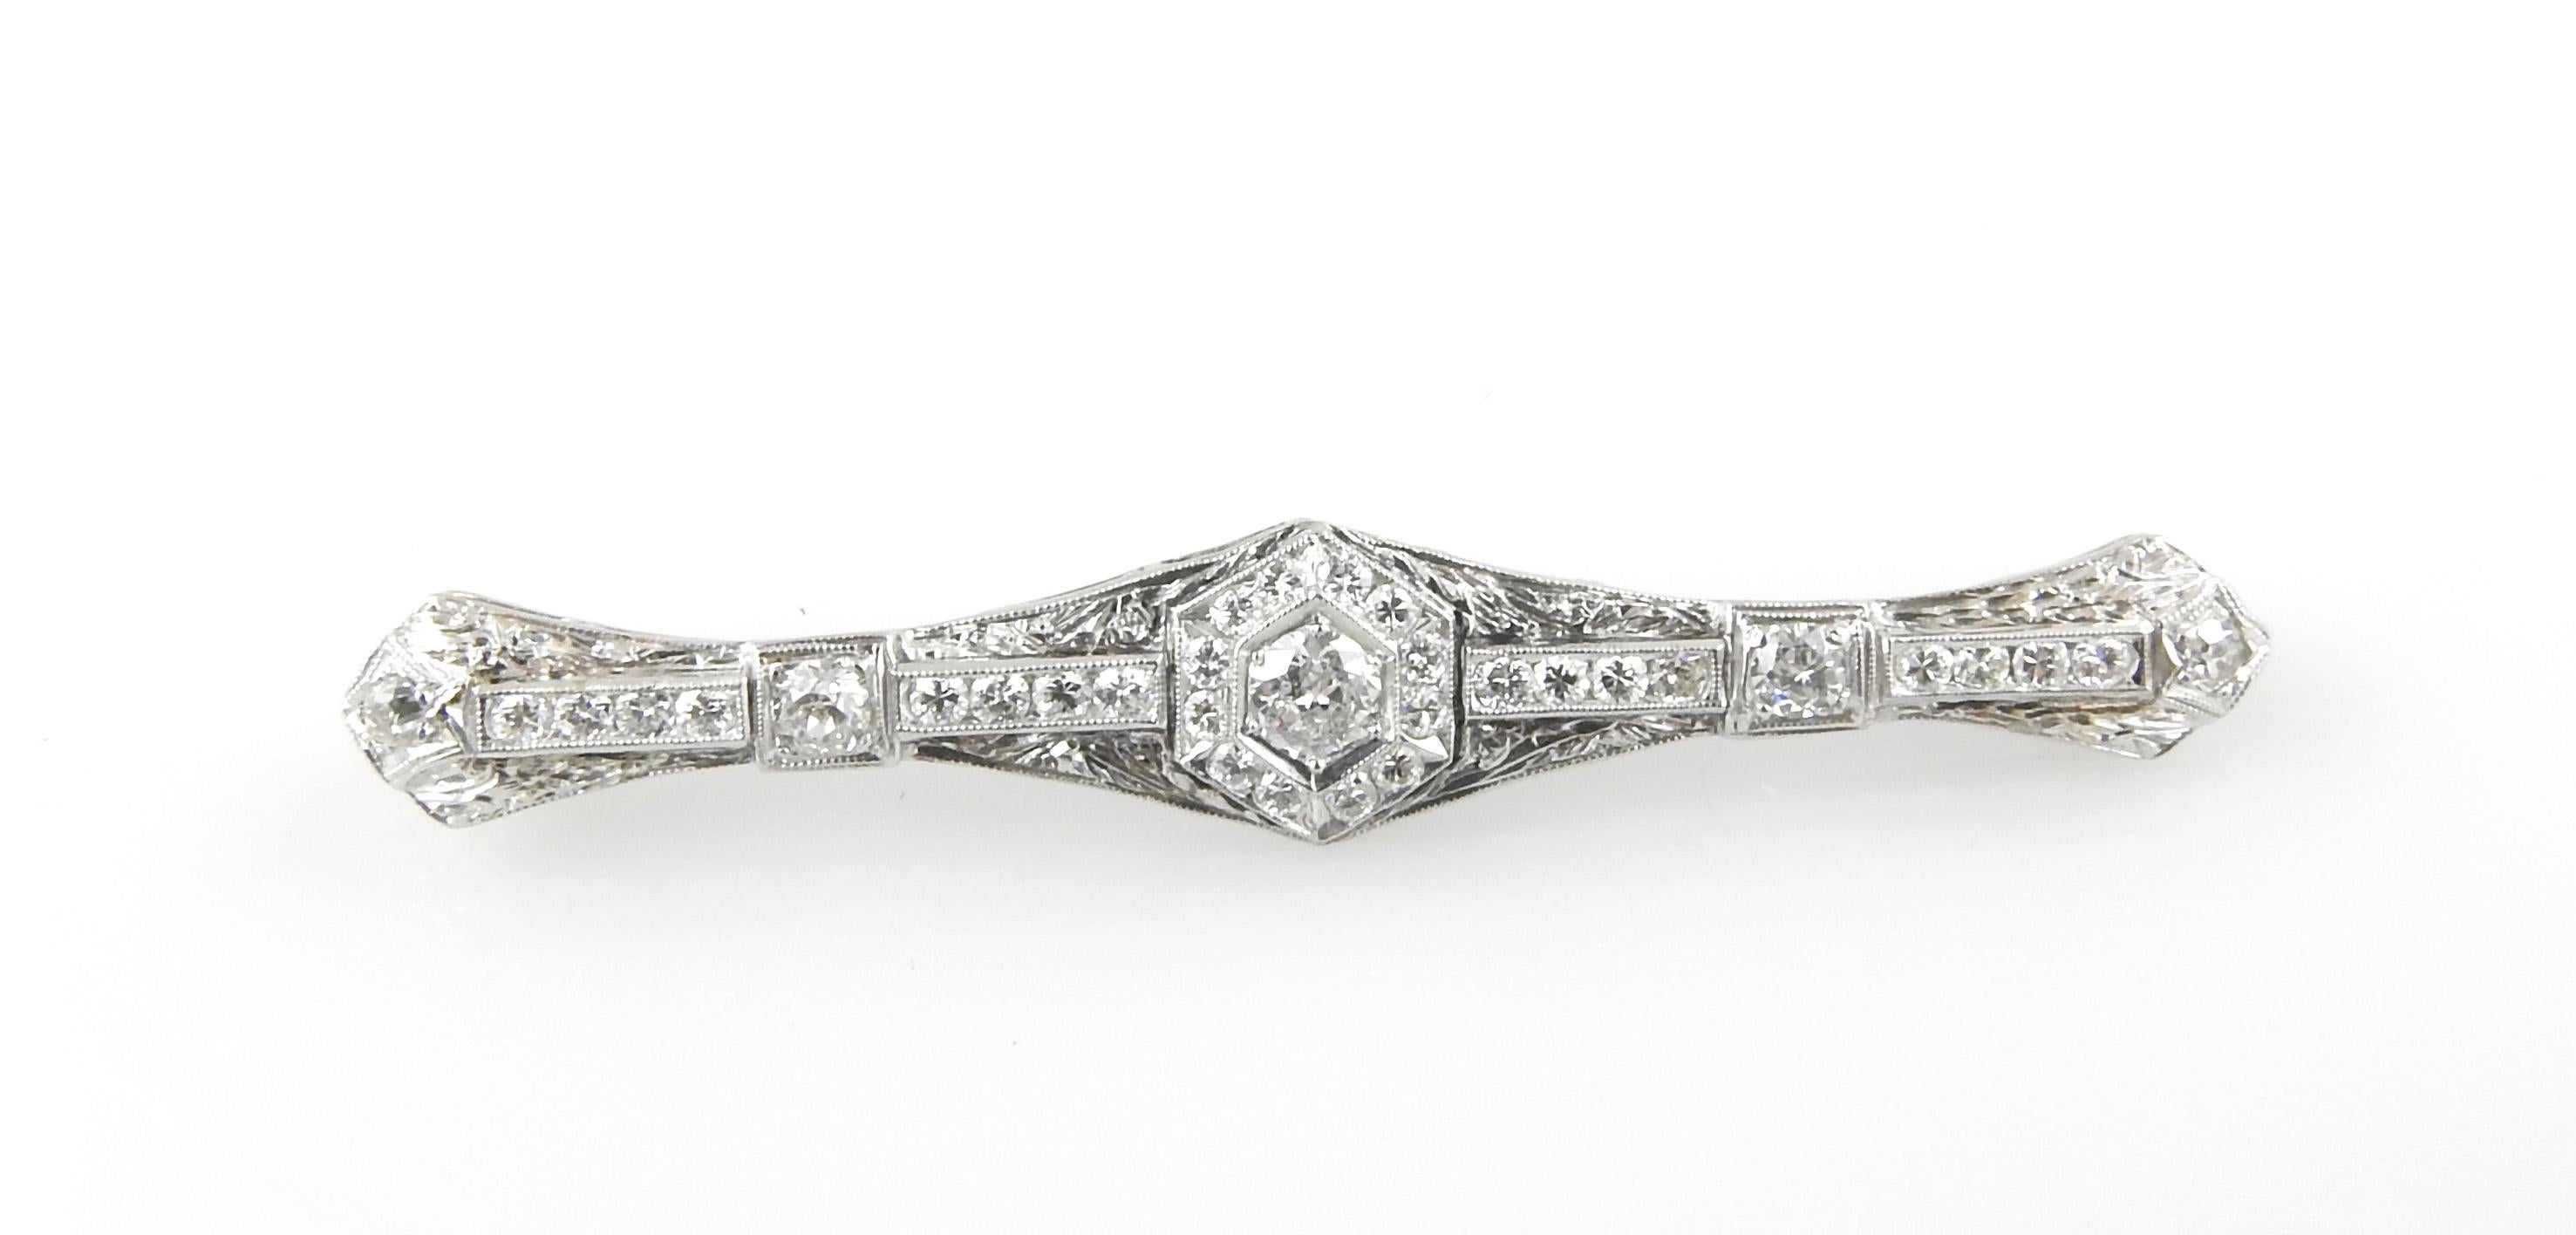 This exquisite bar pin features 33 round brilliant and old mine cut diamonds  set in beautifully detailed white  gold filigree.

Approximate total diamond weight:  1.40 cts.  (Center - .25 ct.)

Diamond color:  G-H

Diamond clarity:  SI1-VS2

Size: 